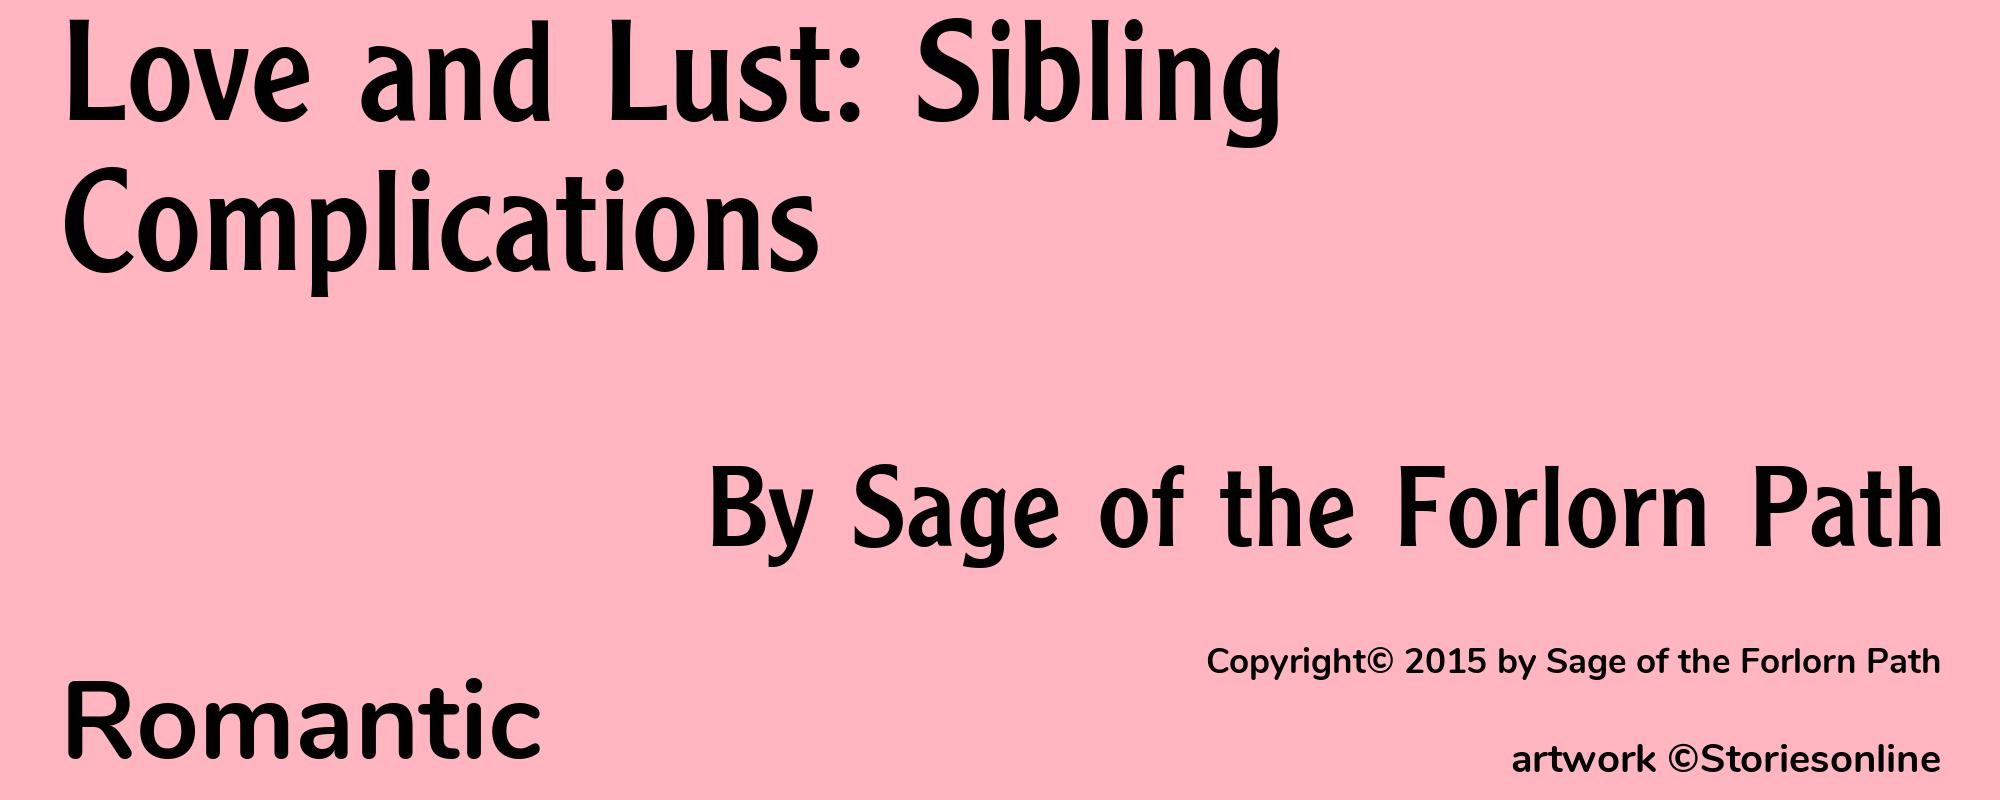 Love and Lust: Sibling Complications - Cover